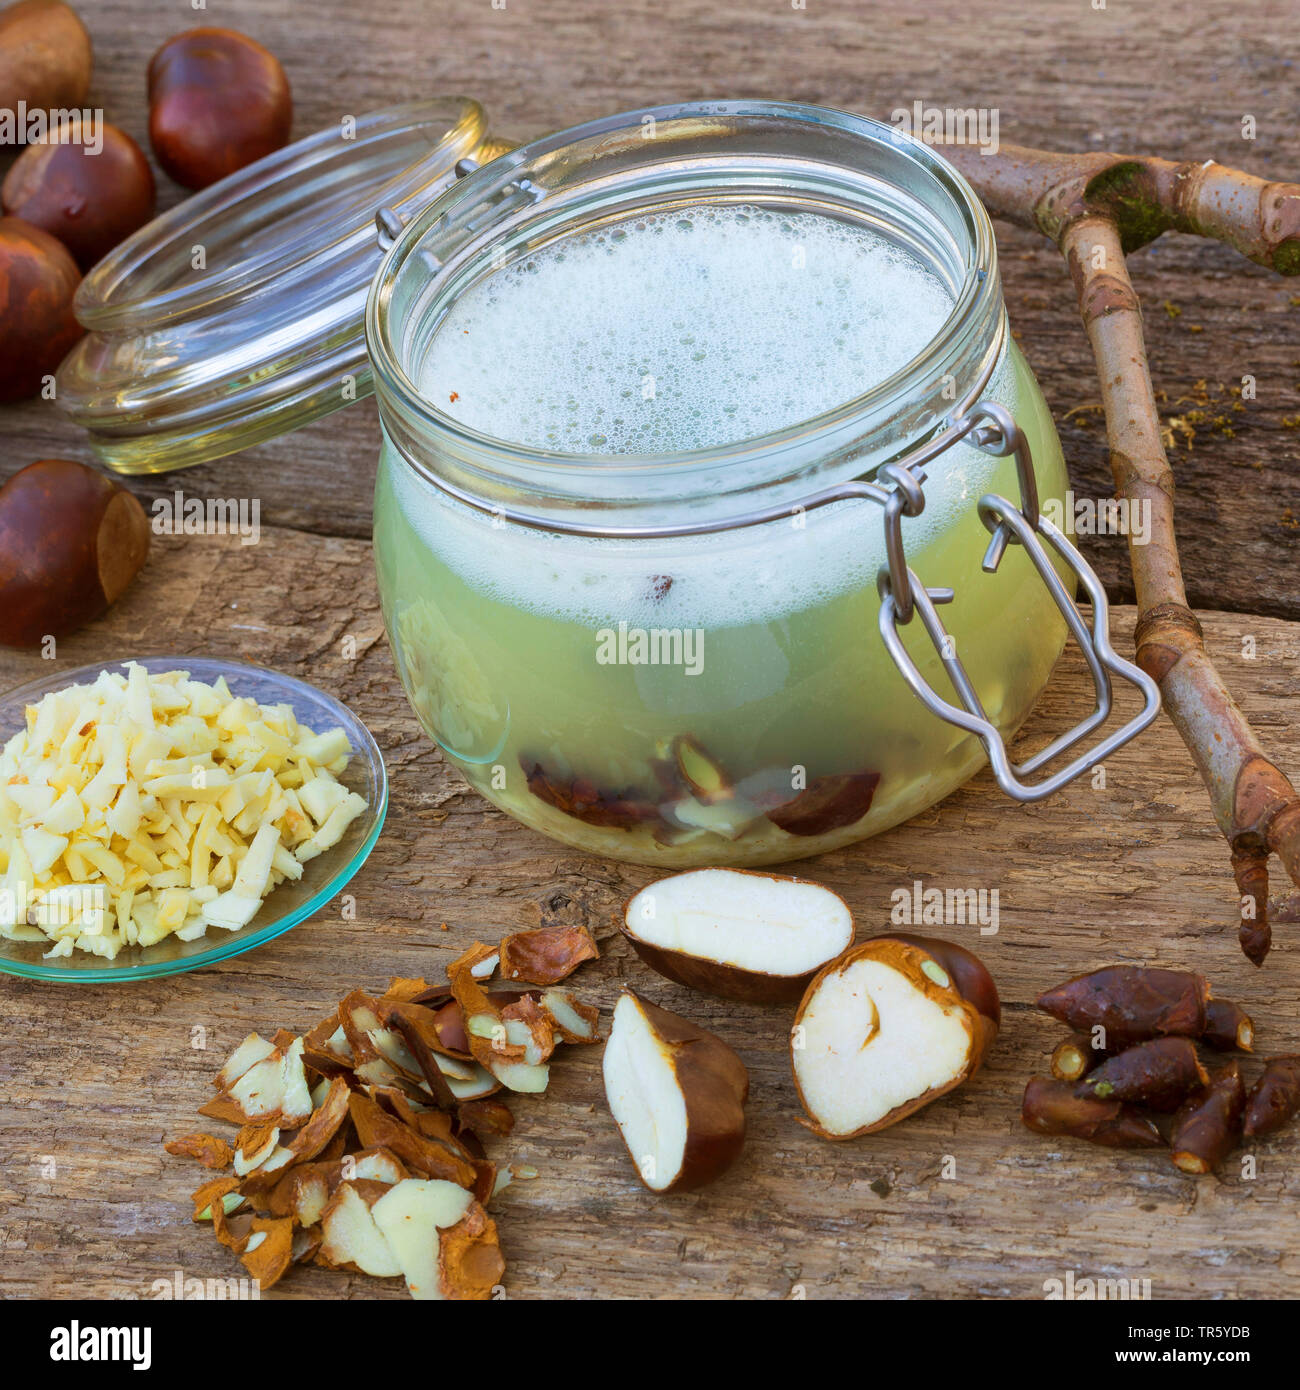 common horse chestnut (Aesculus hippocastanum), selfmade horse chestnut tincture, Germany Stock Photo